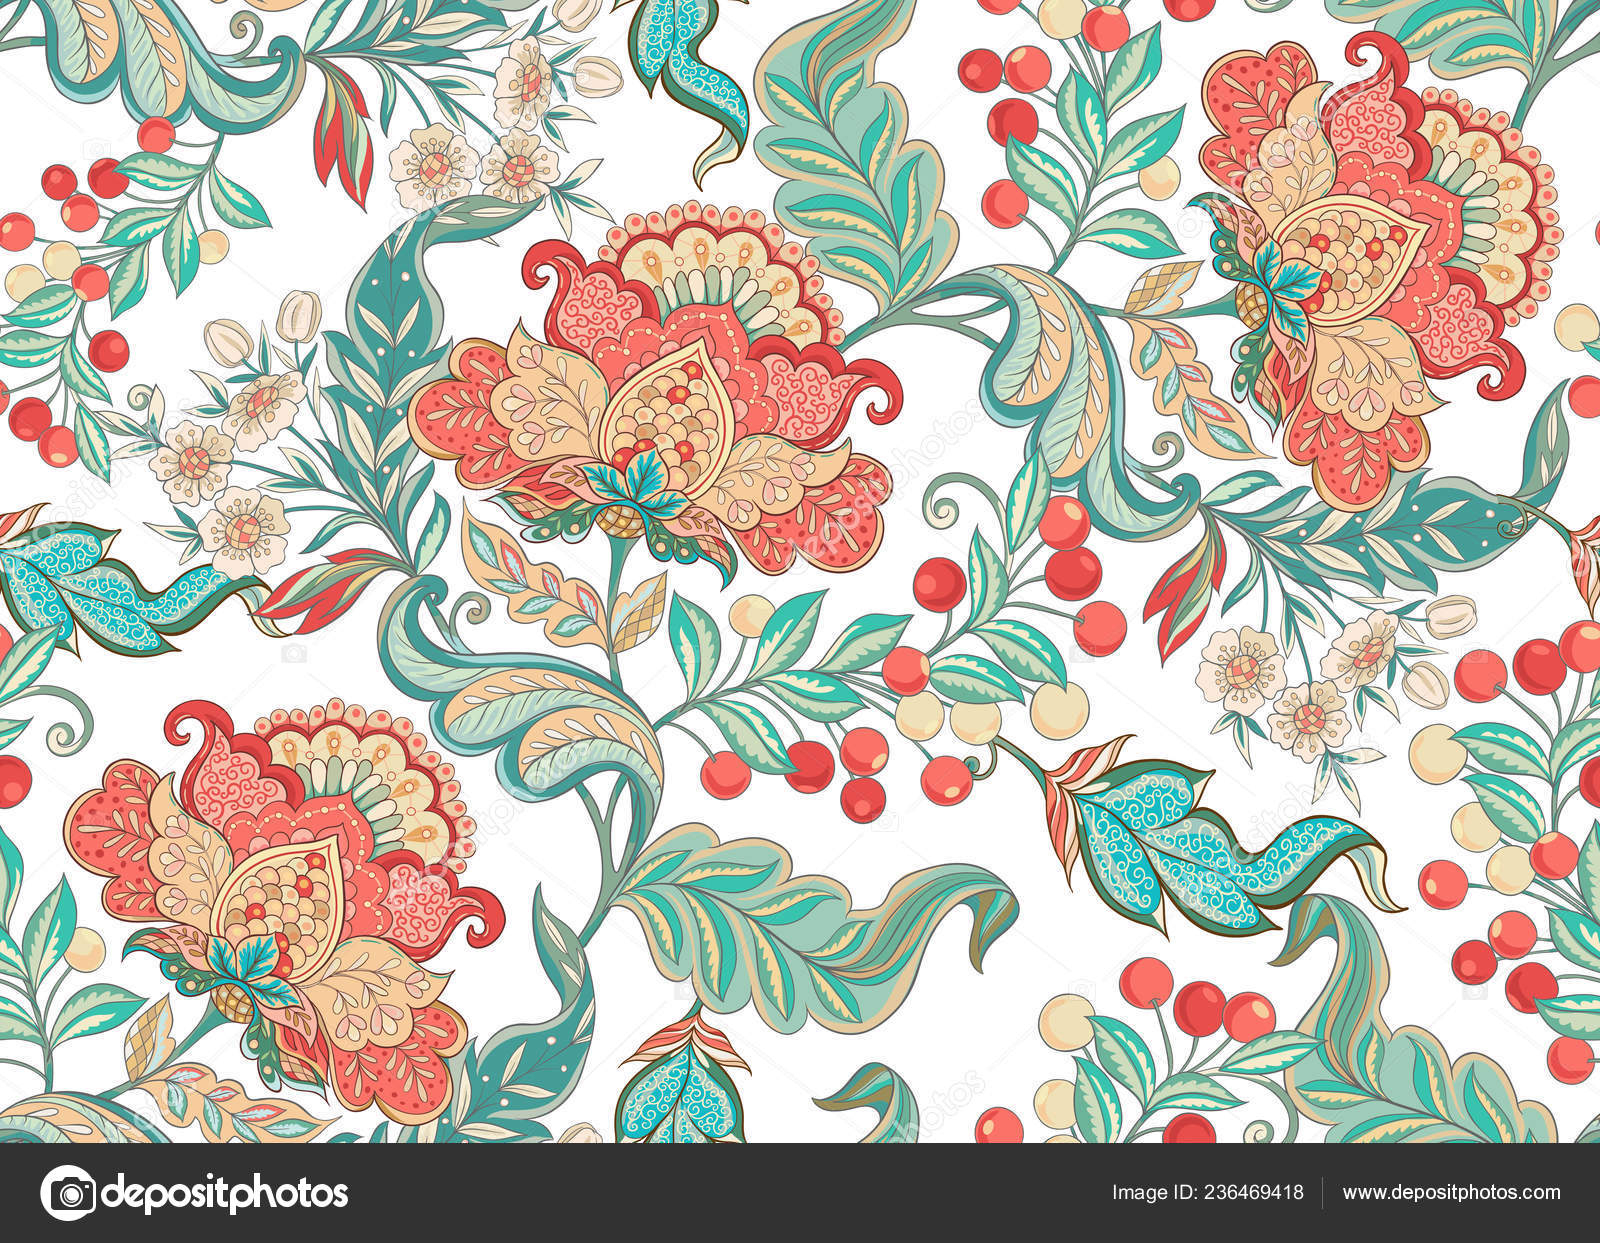 Jacobean Embroidery Patterns Fantasy Floral Seamless Pattern Jacobean Embroidery Style Vintage